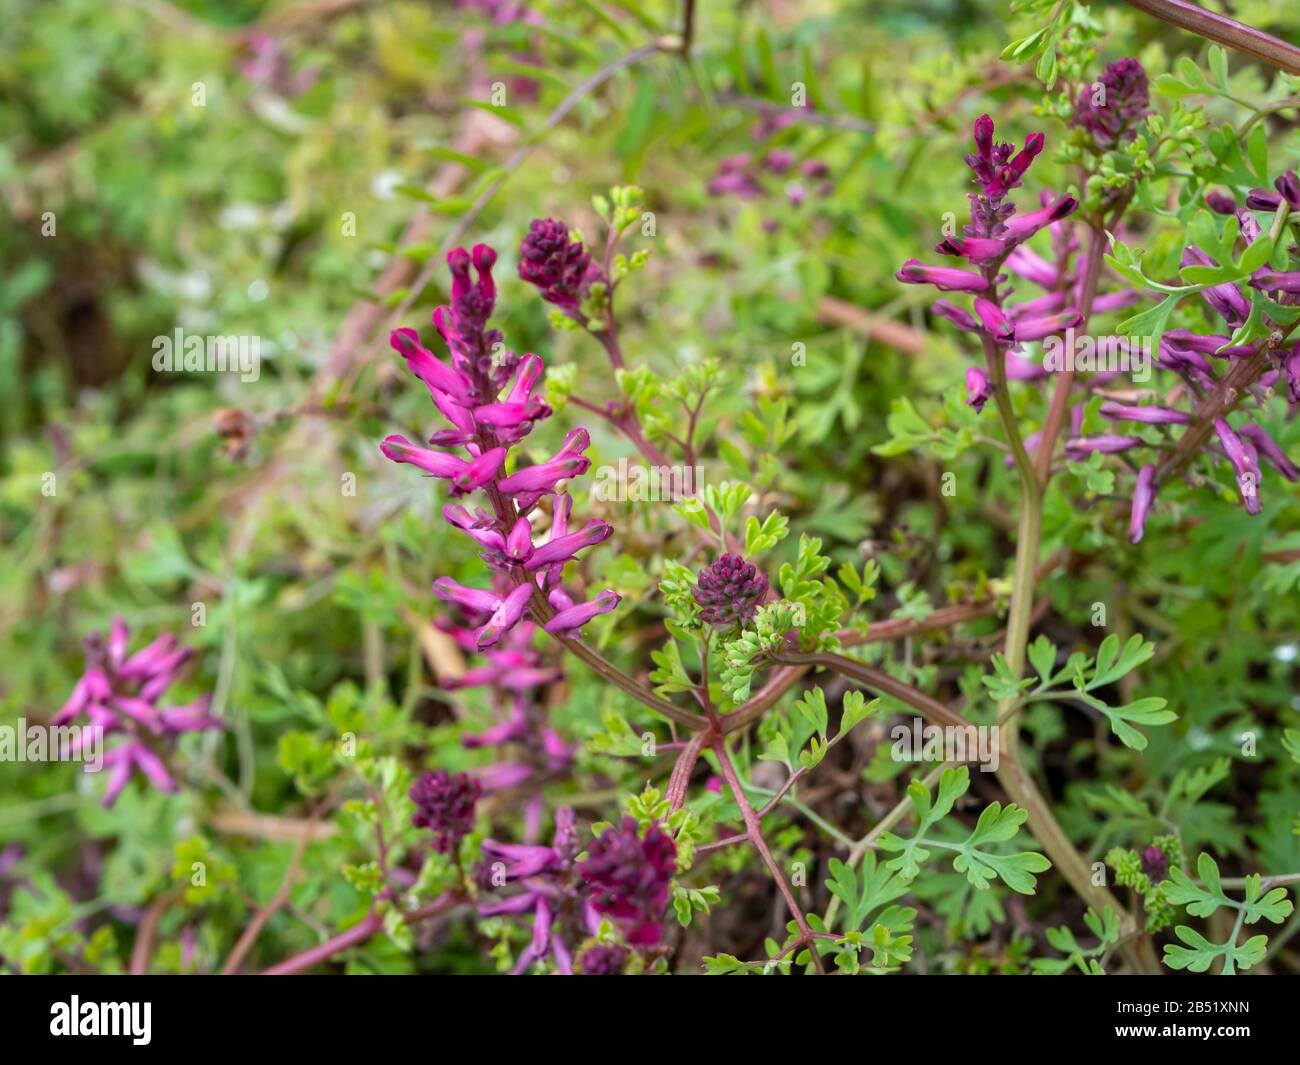 Ordinary fumigation plant in the garden Stock Photo